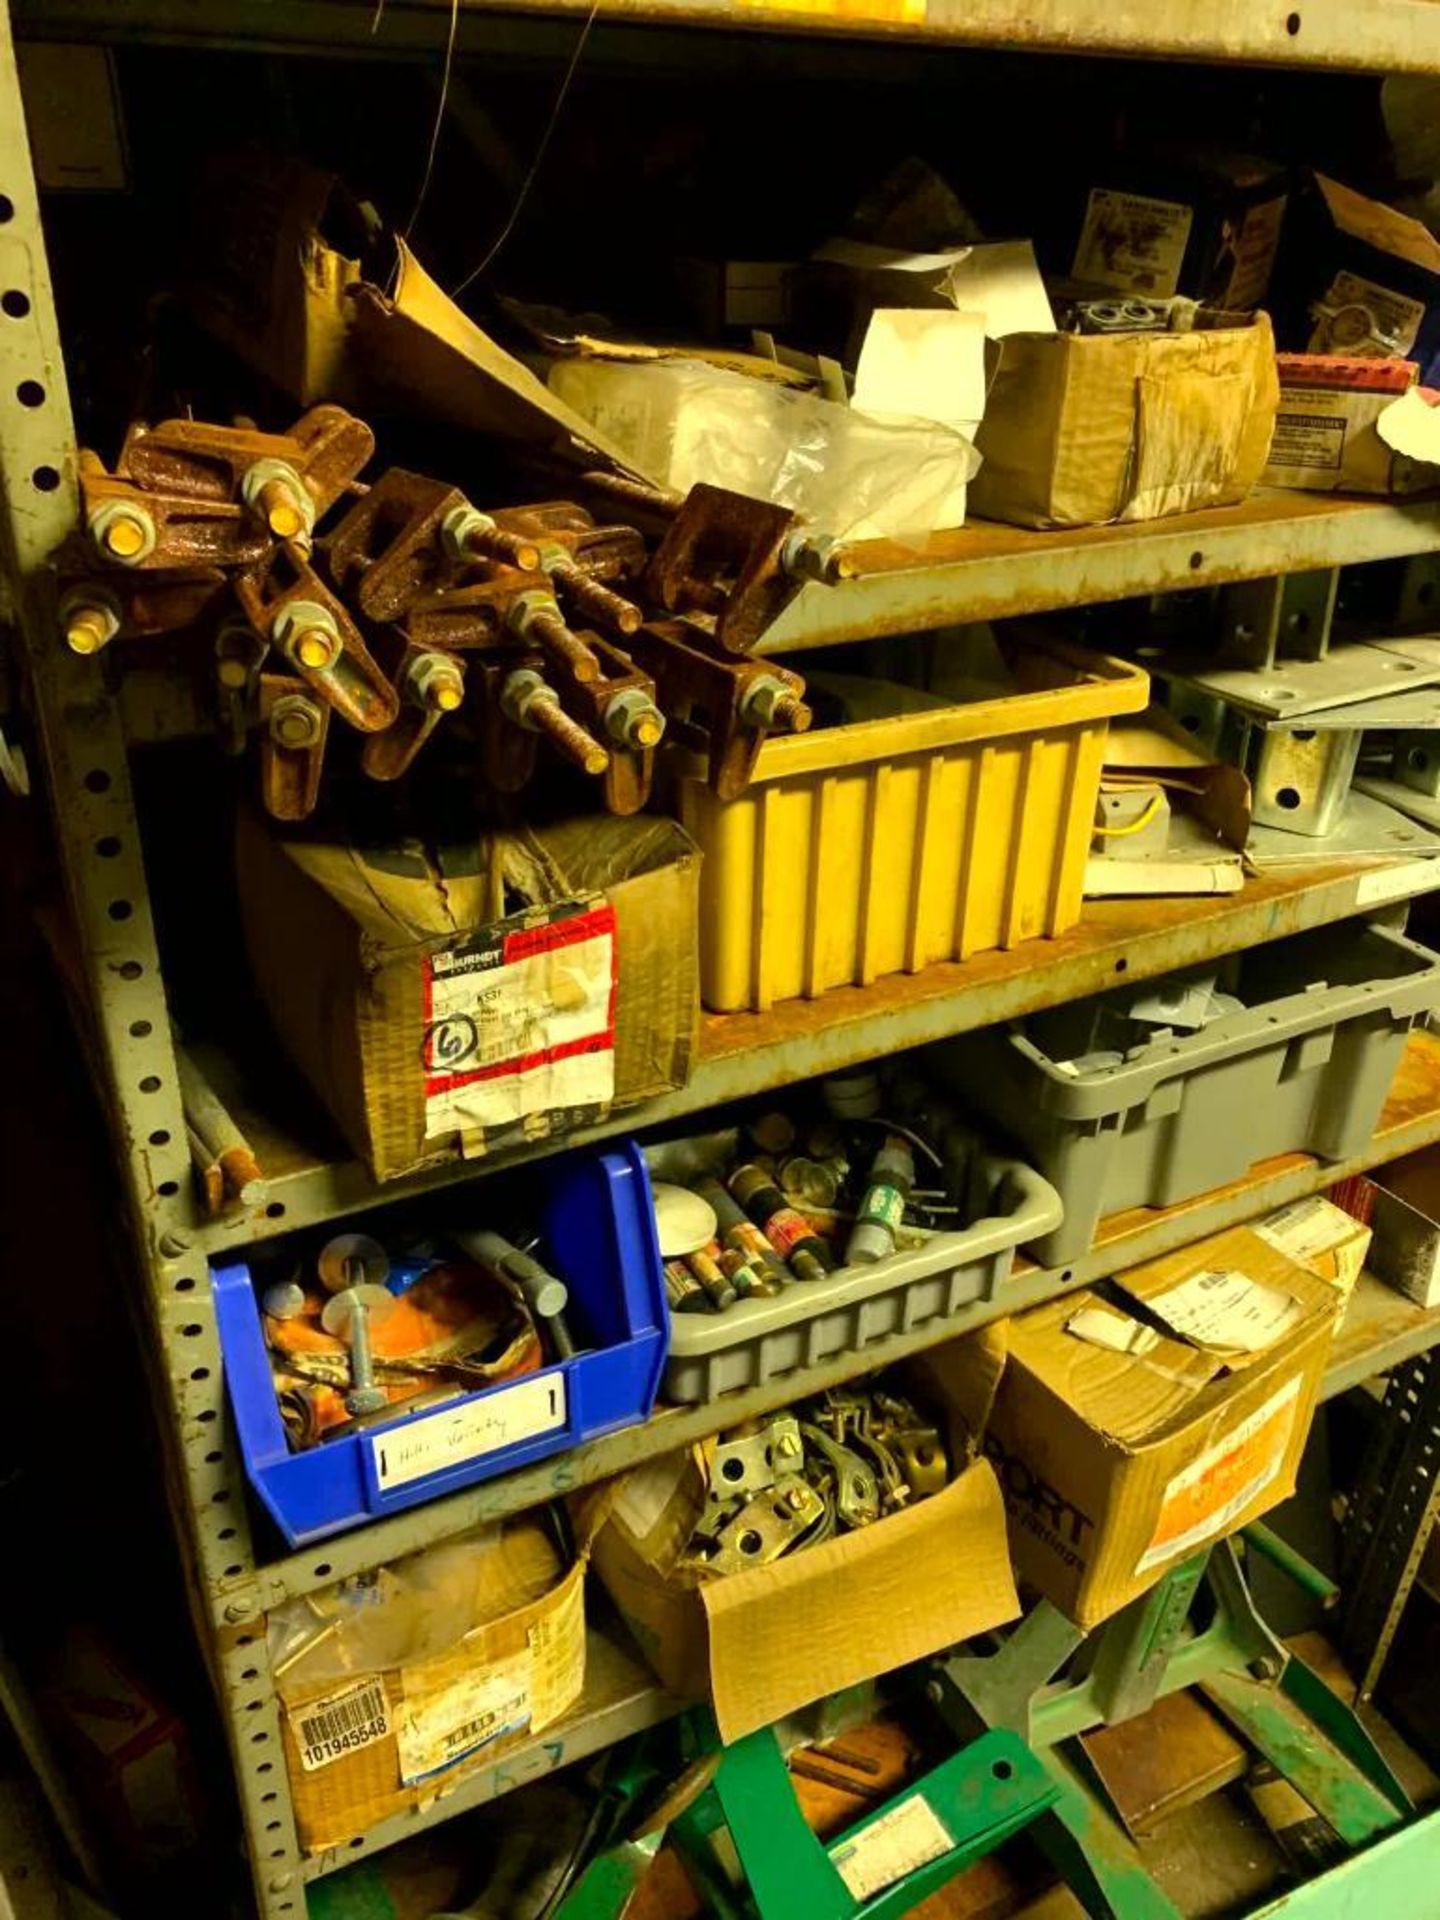 Content of Electrical Supply Room; Spools of Wire, Couplings, Breakers, Fuses, & Much More - Image 5 of 18